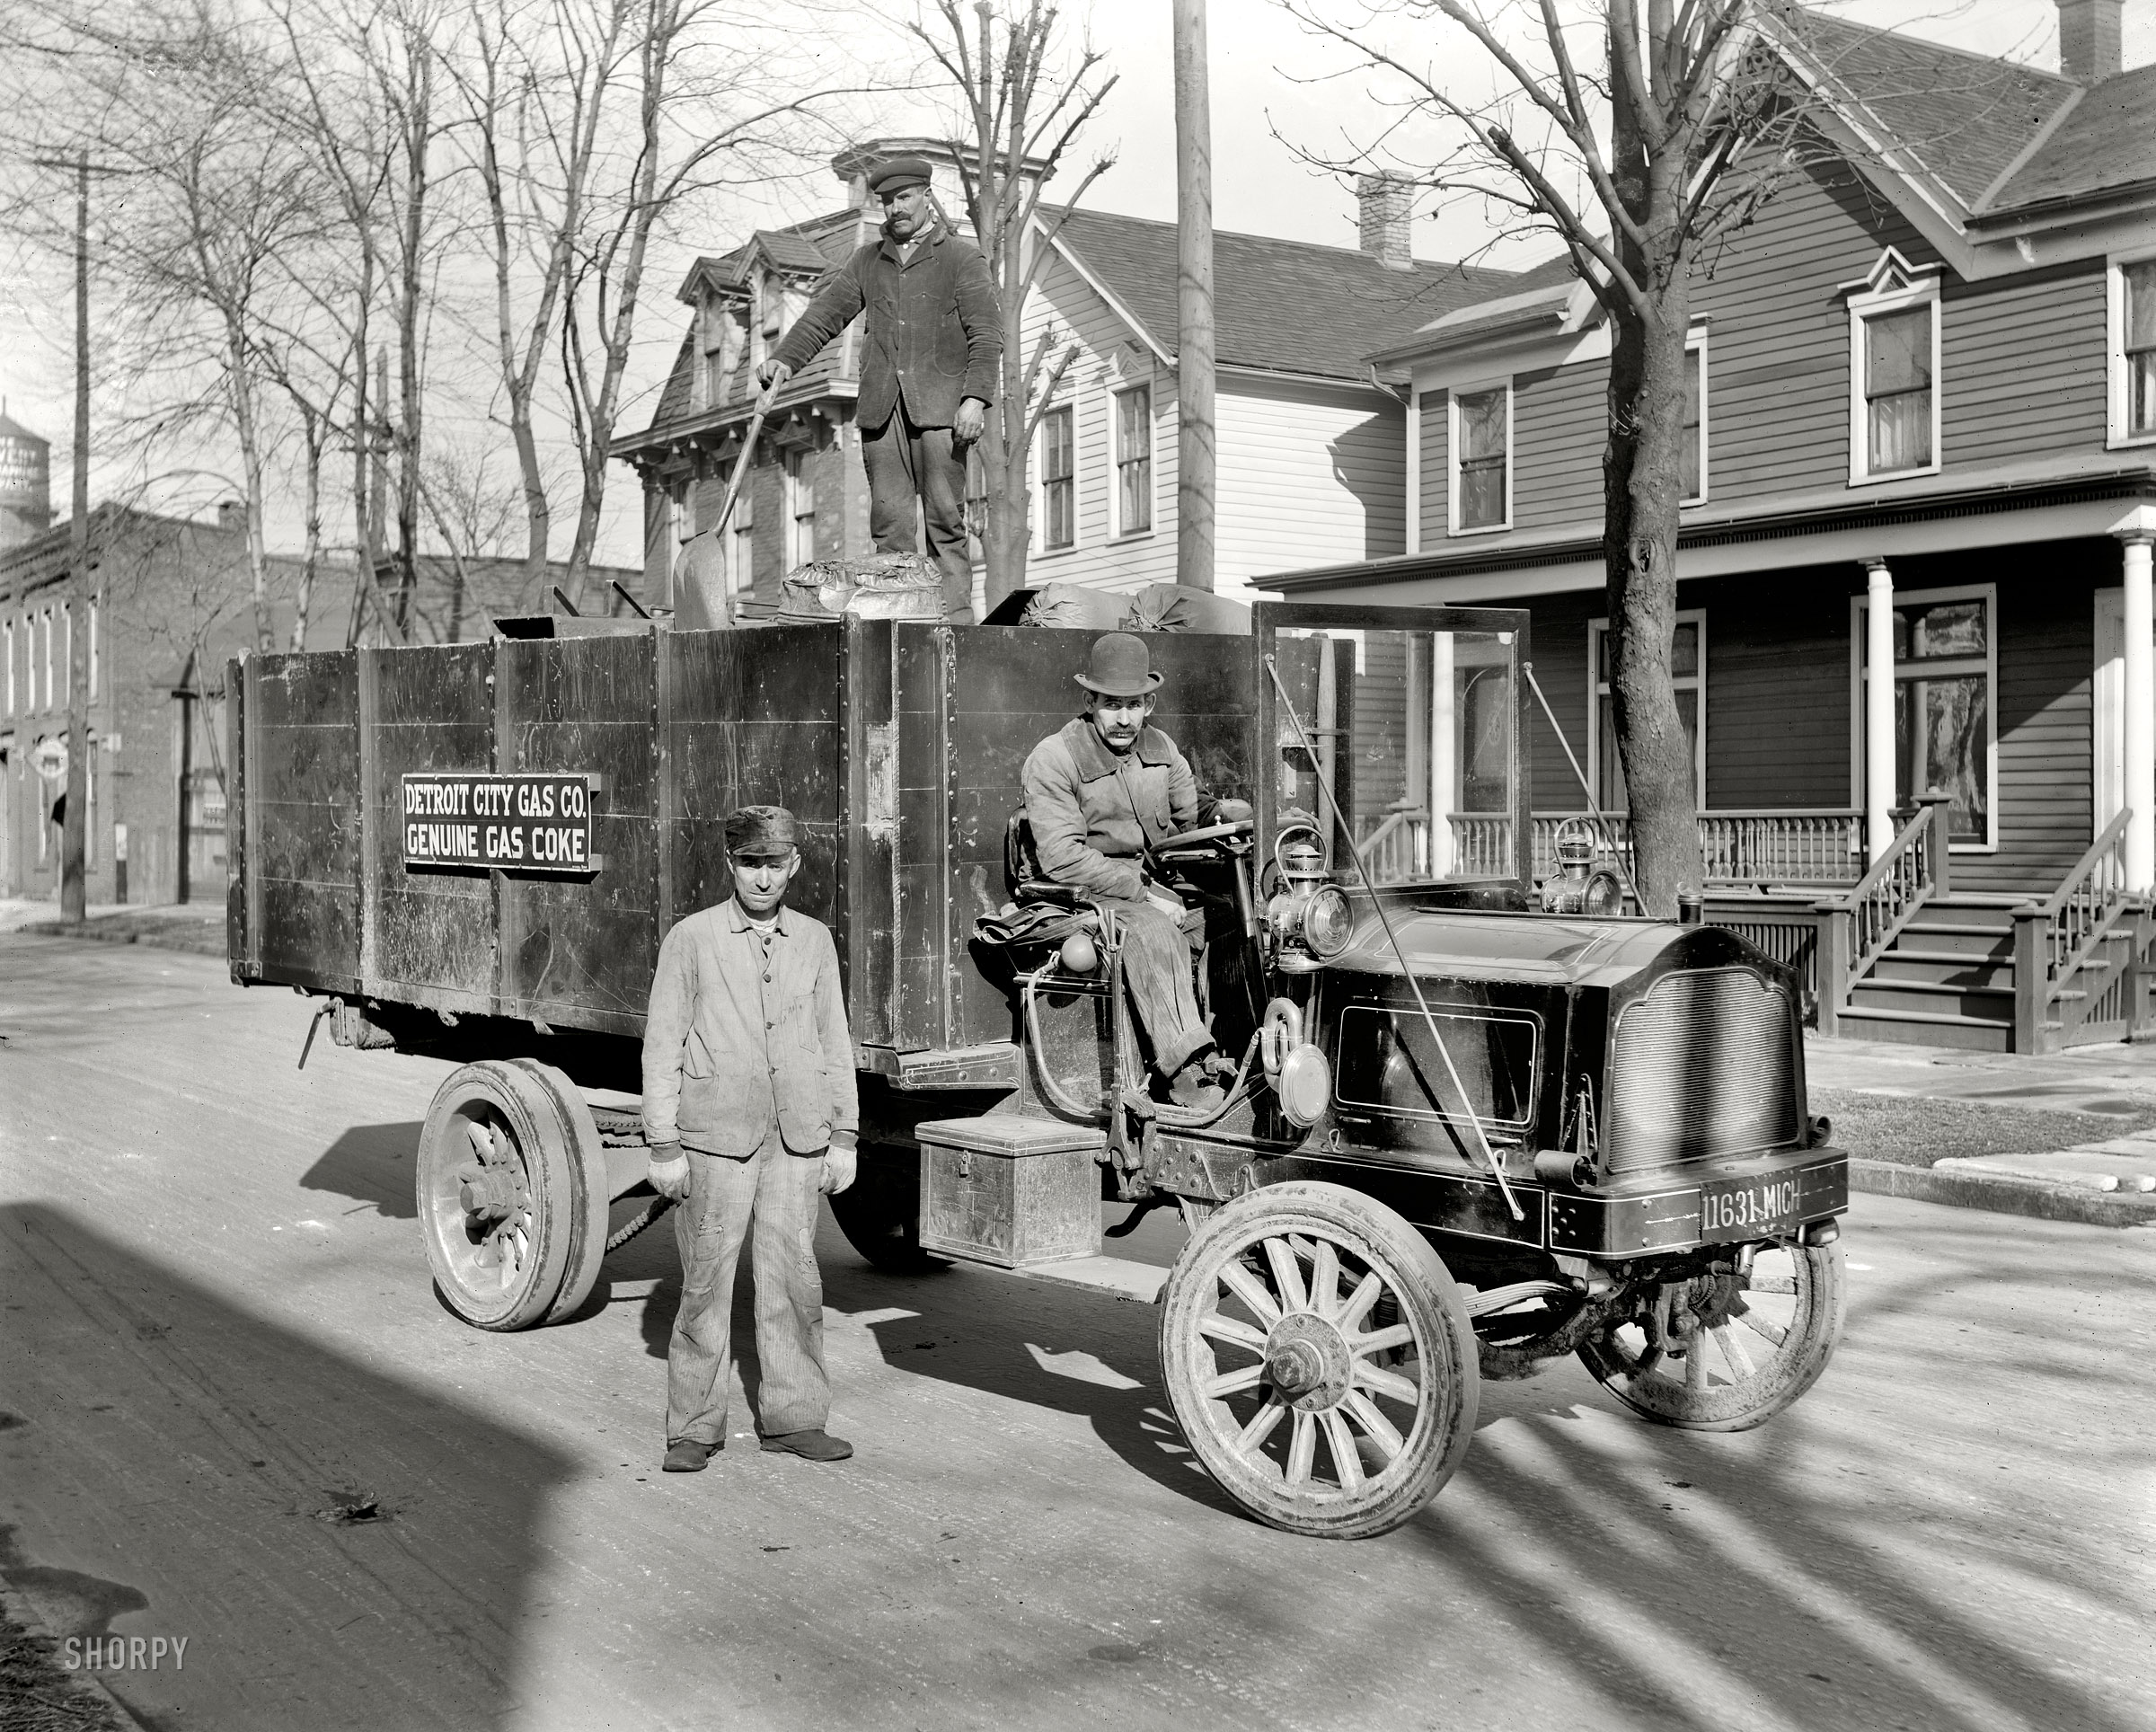 Circa 1912. "Coke delivery wagon and workers, Detroit City Gas Co." Our second look at these grimy gents and their battered Packard truck. View full size.